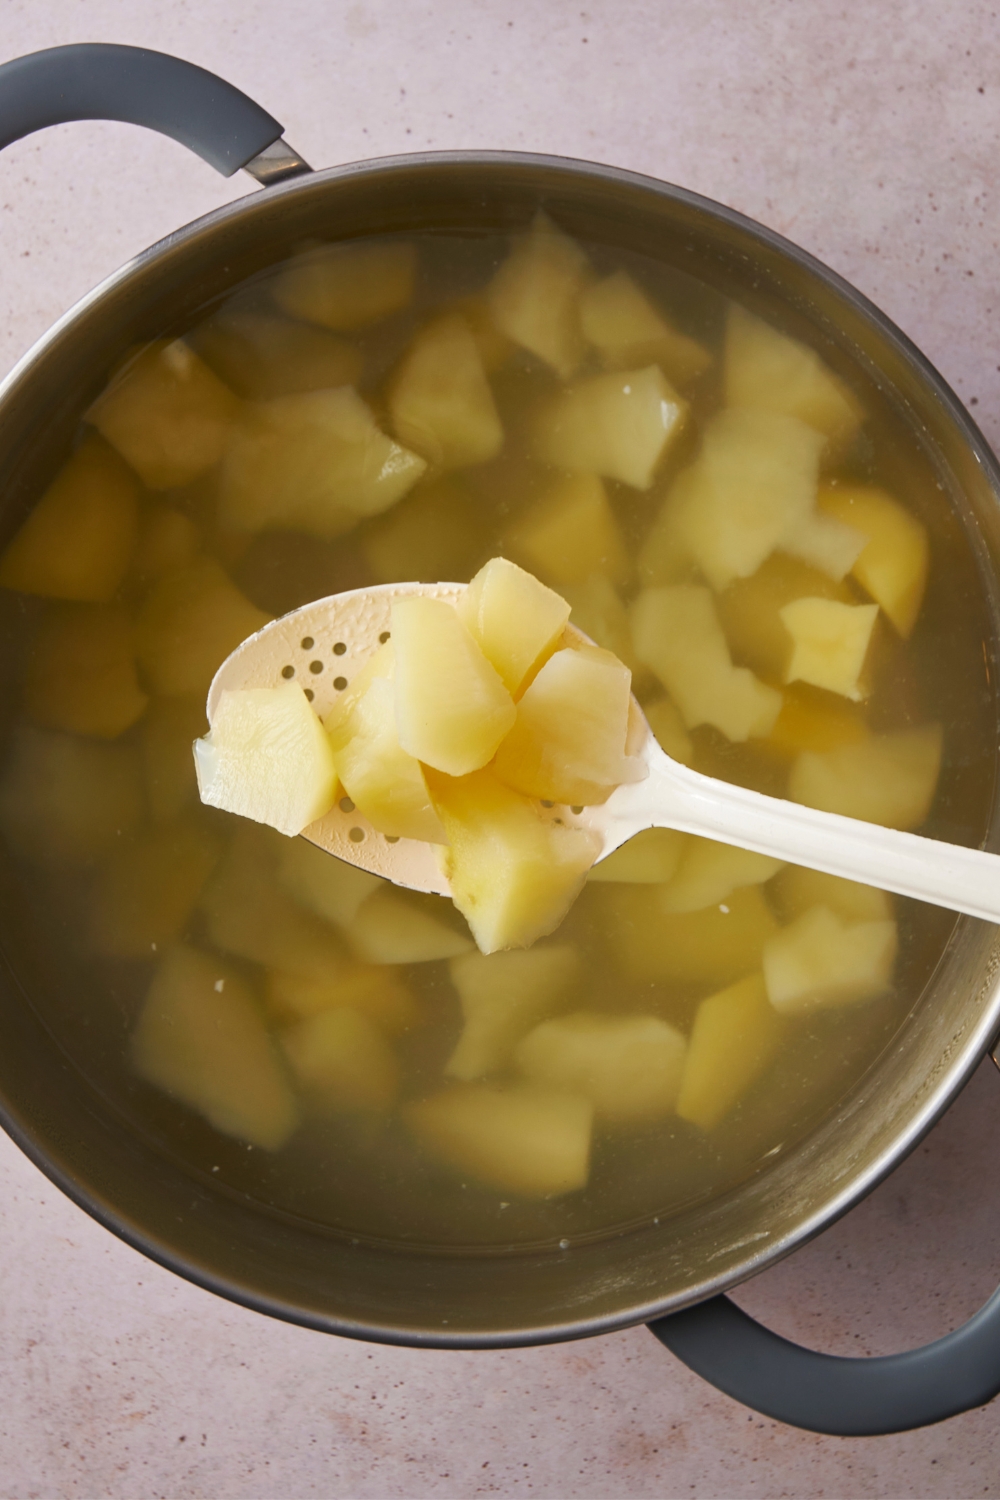 A slotted spoon holding diced potatoes over a deep pot with the remaining cubed potatoes in hot water.